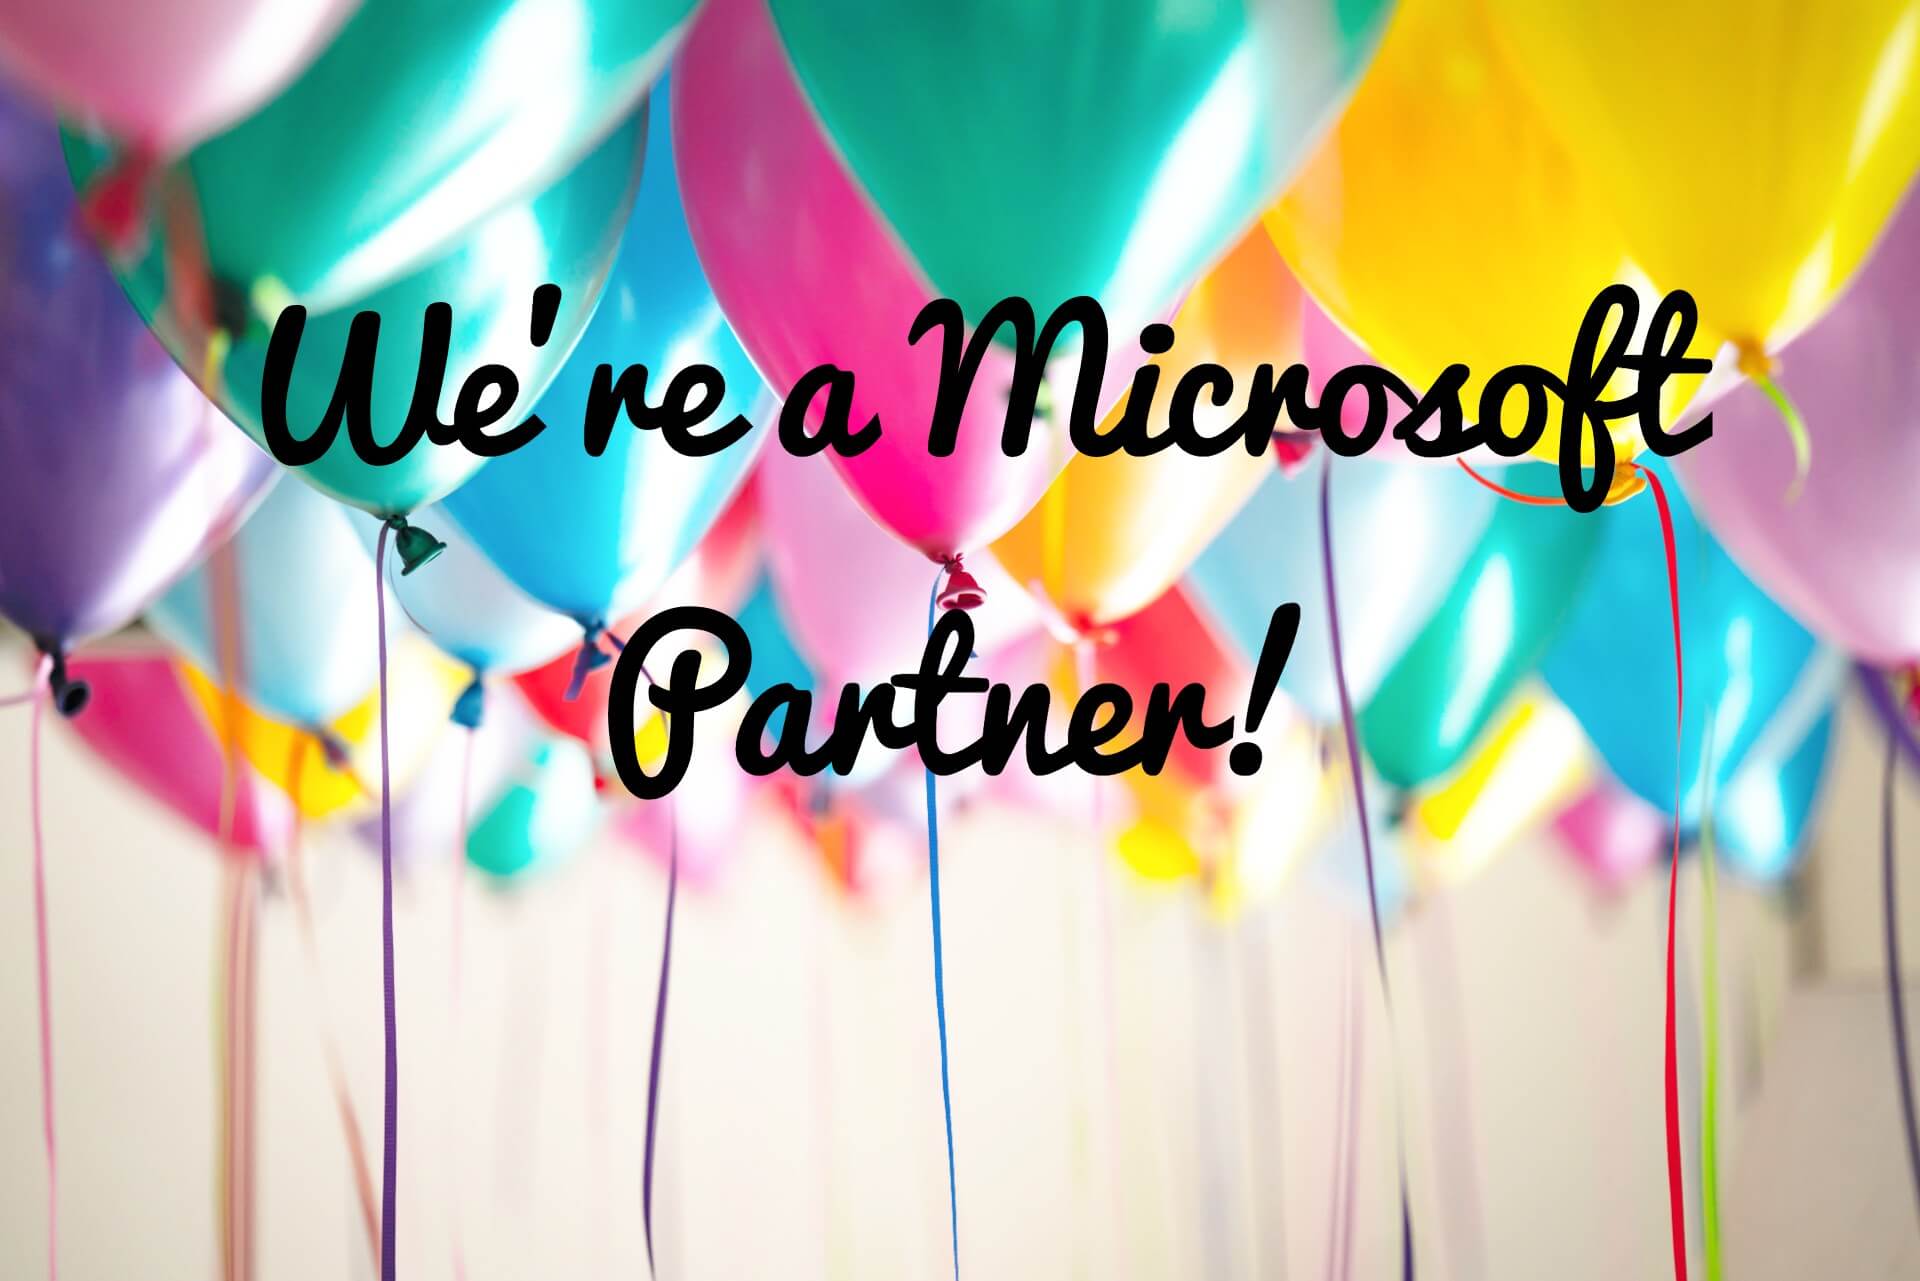 It’s Official: We’re Now a Microsoft Partner!